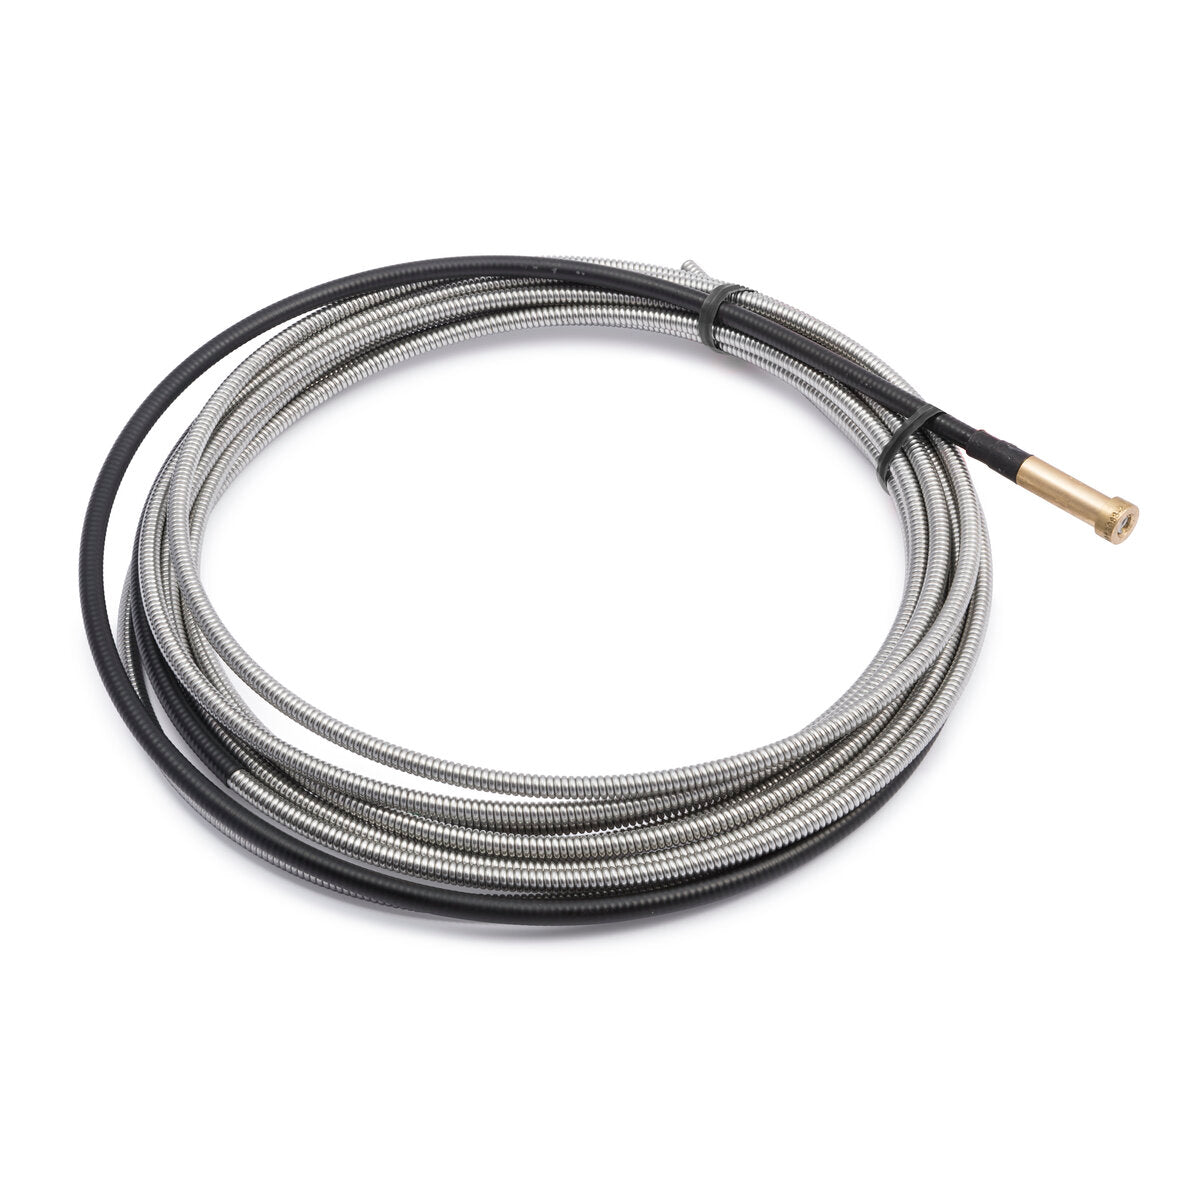 Lincoln Electric - Cable Liner .052-1/16 in (1.3-1.6 mm) 25 ft (7.6 m) - KP44-116-25